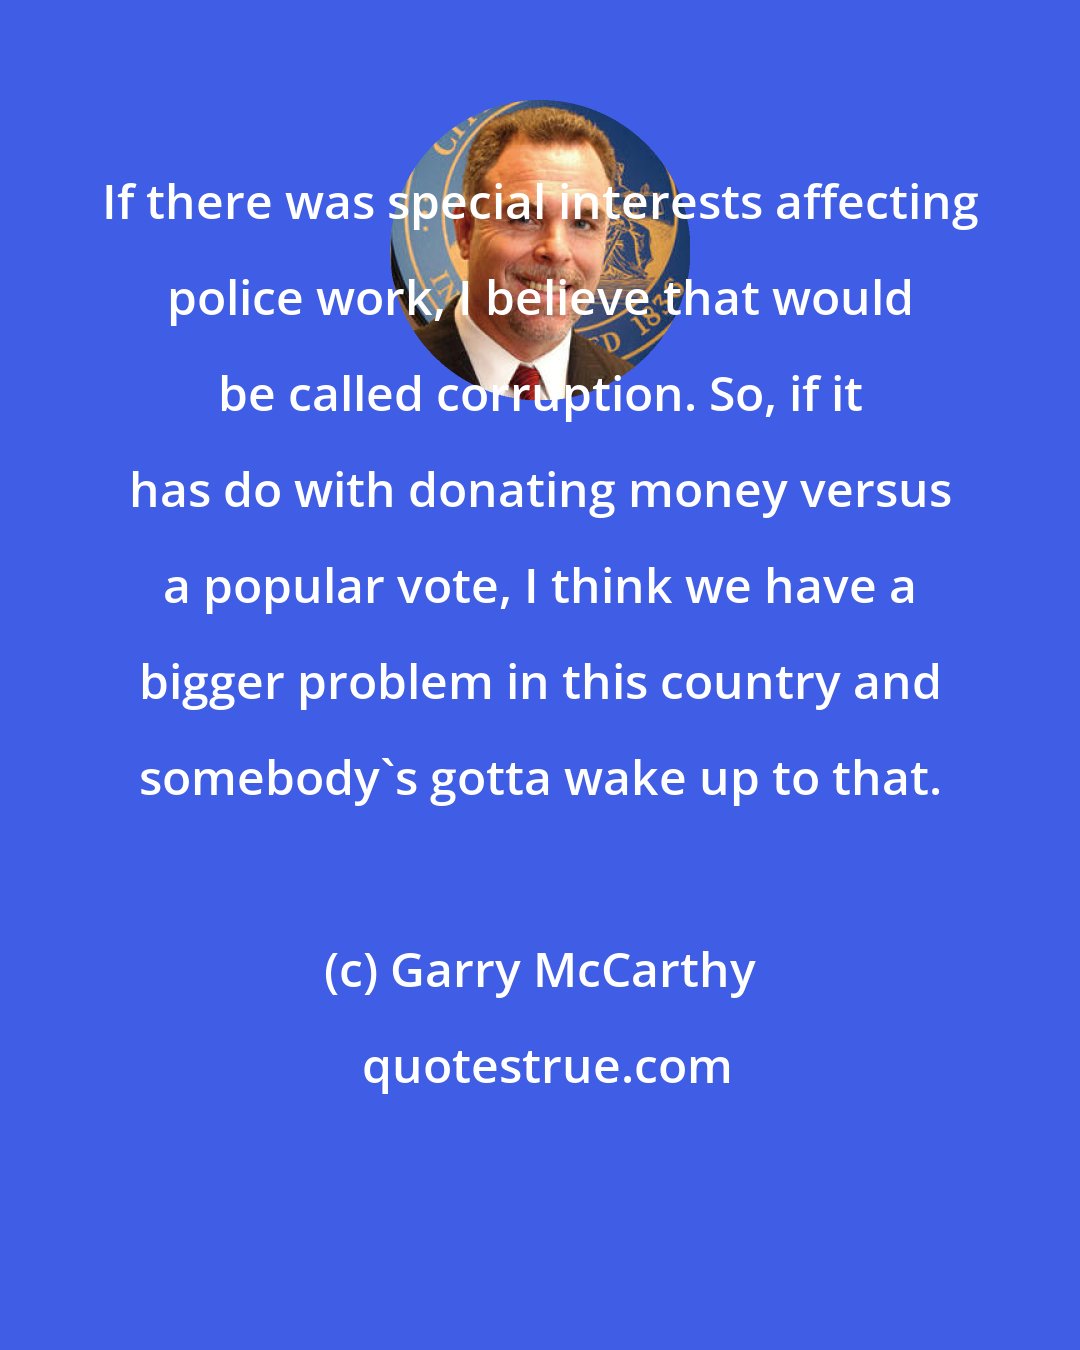 Garry McCarthy: If there was special interests affecting police work, I believe that would be called corruption. So, if it has do with donating money versus a popular vote, I think we have a bigger problem in this country and somebody's gotta wake up to that.